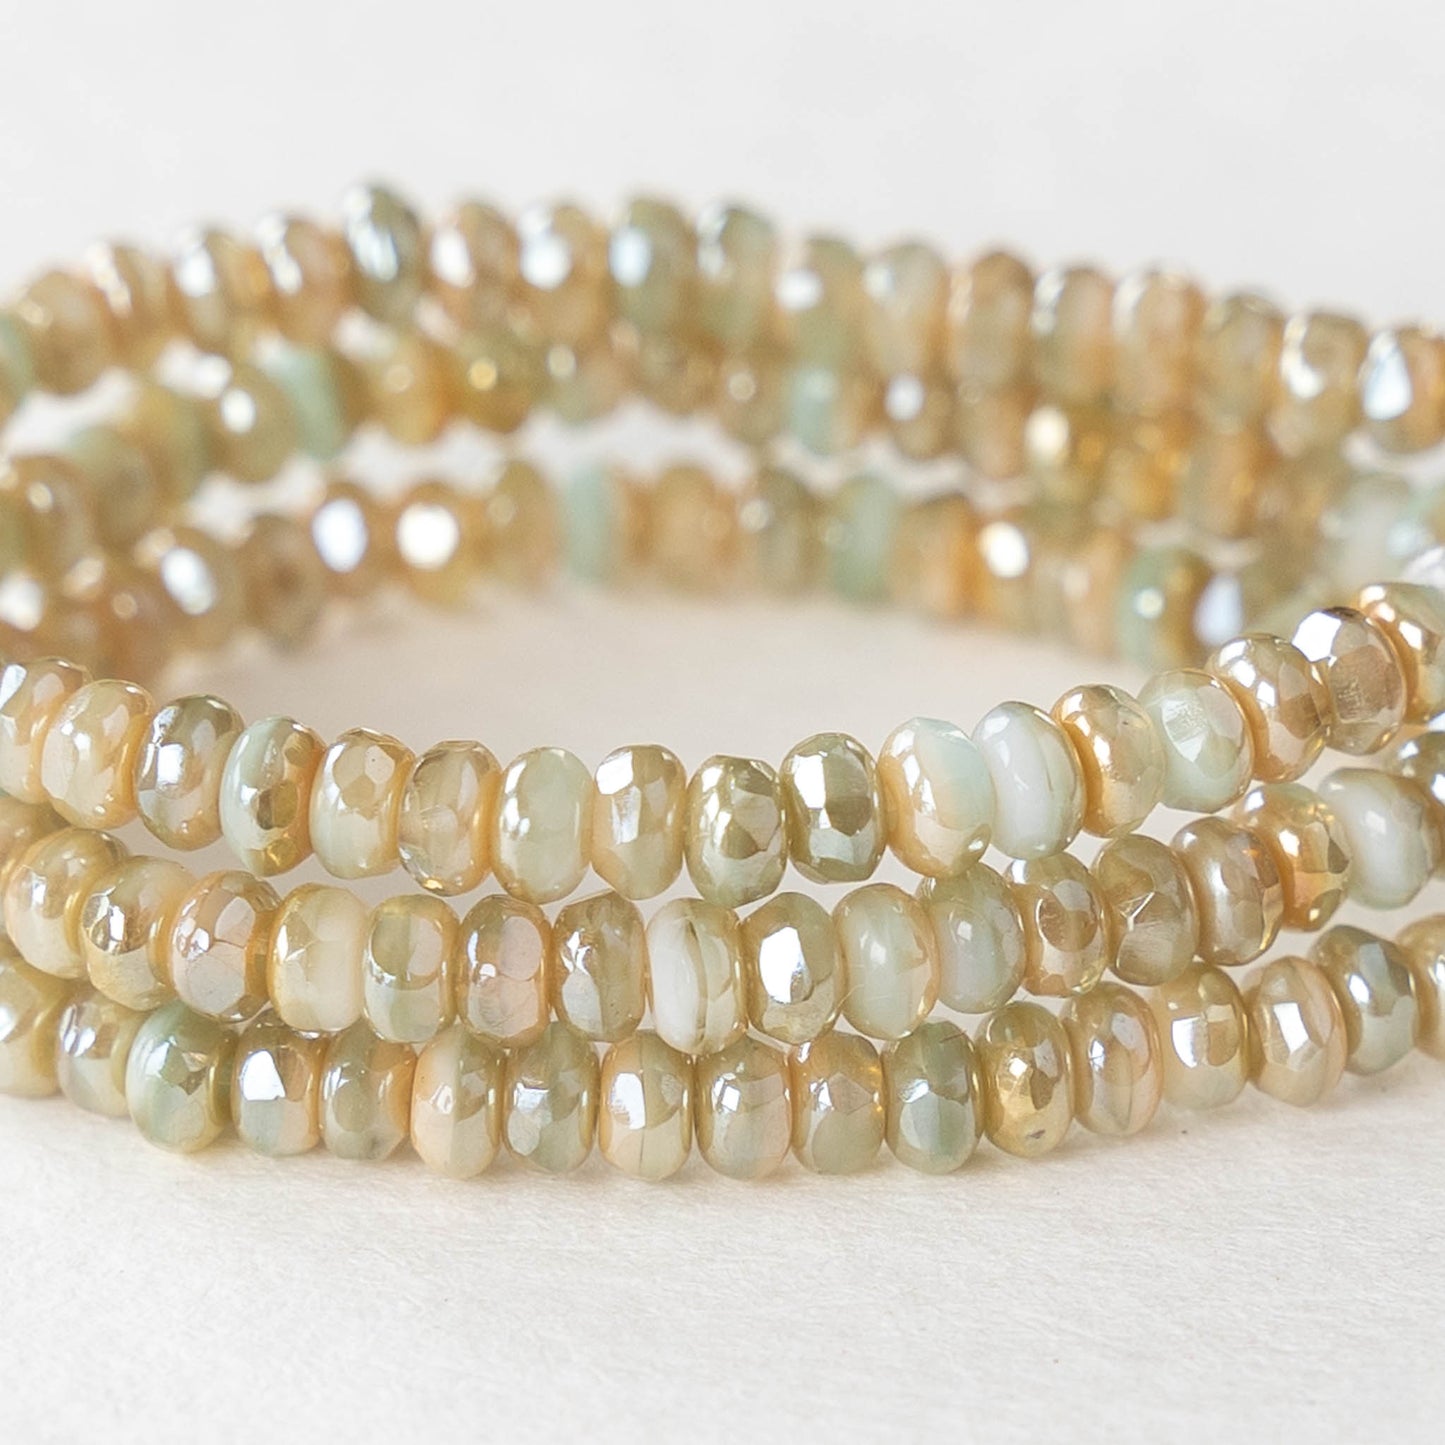 2x3mm Rondelle Beads - Seafoam and Ivory Opaline Mix with Celsian Finish - 50 Beads